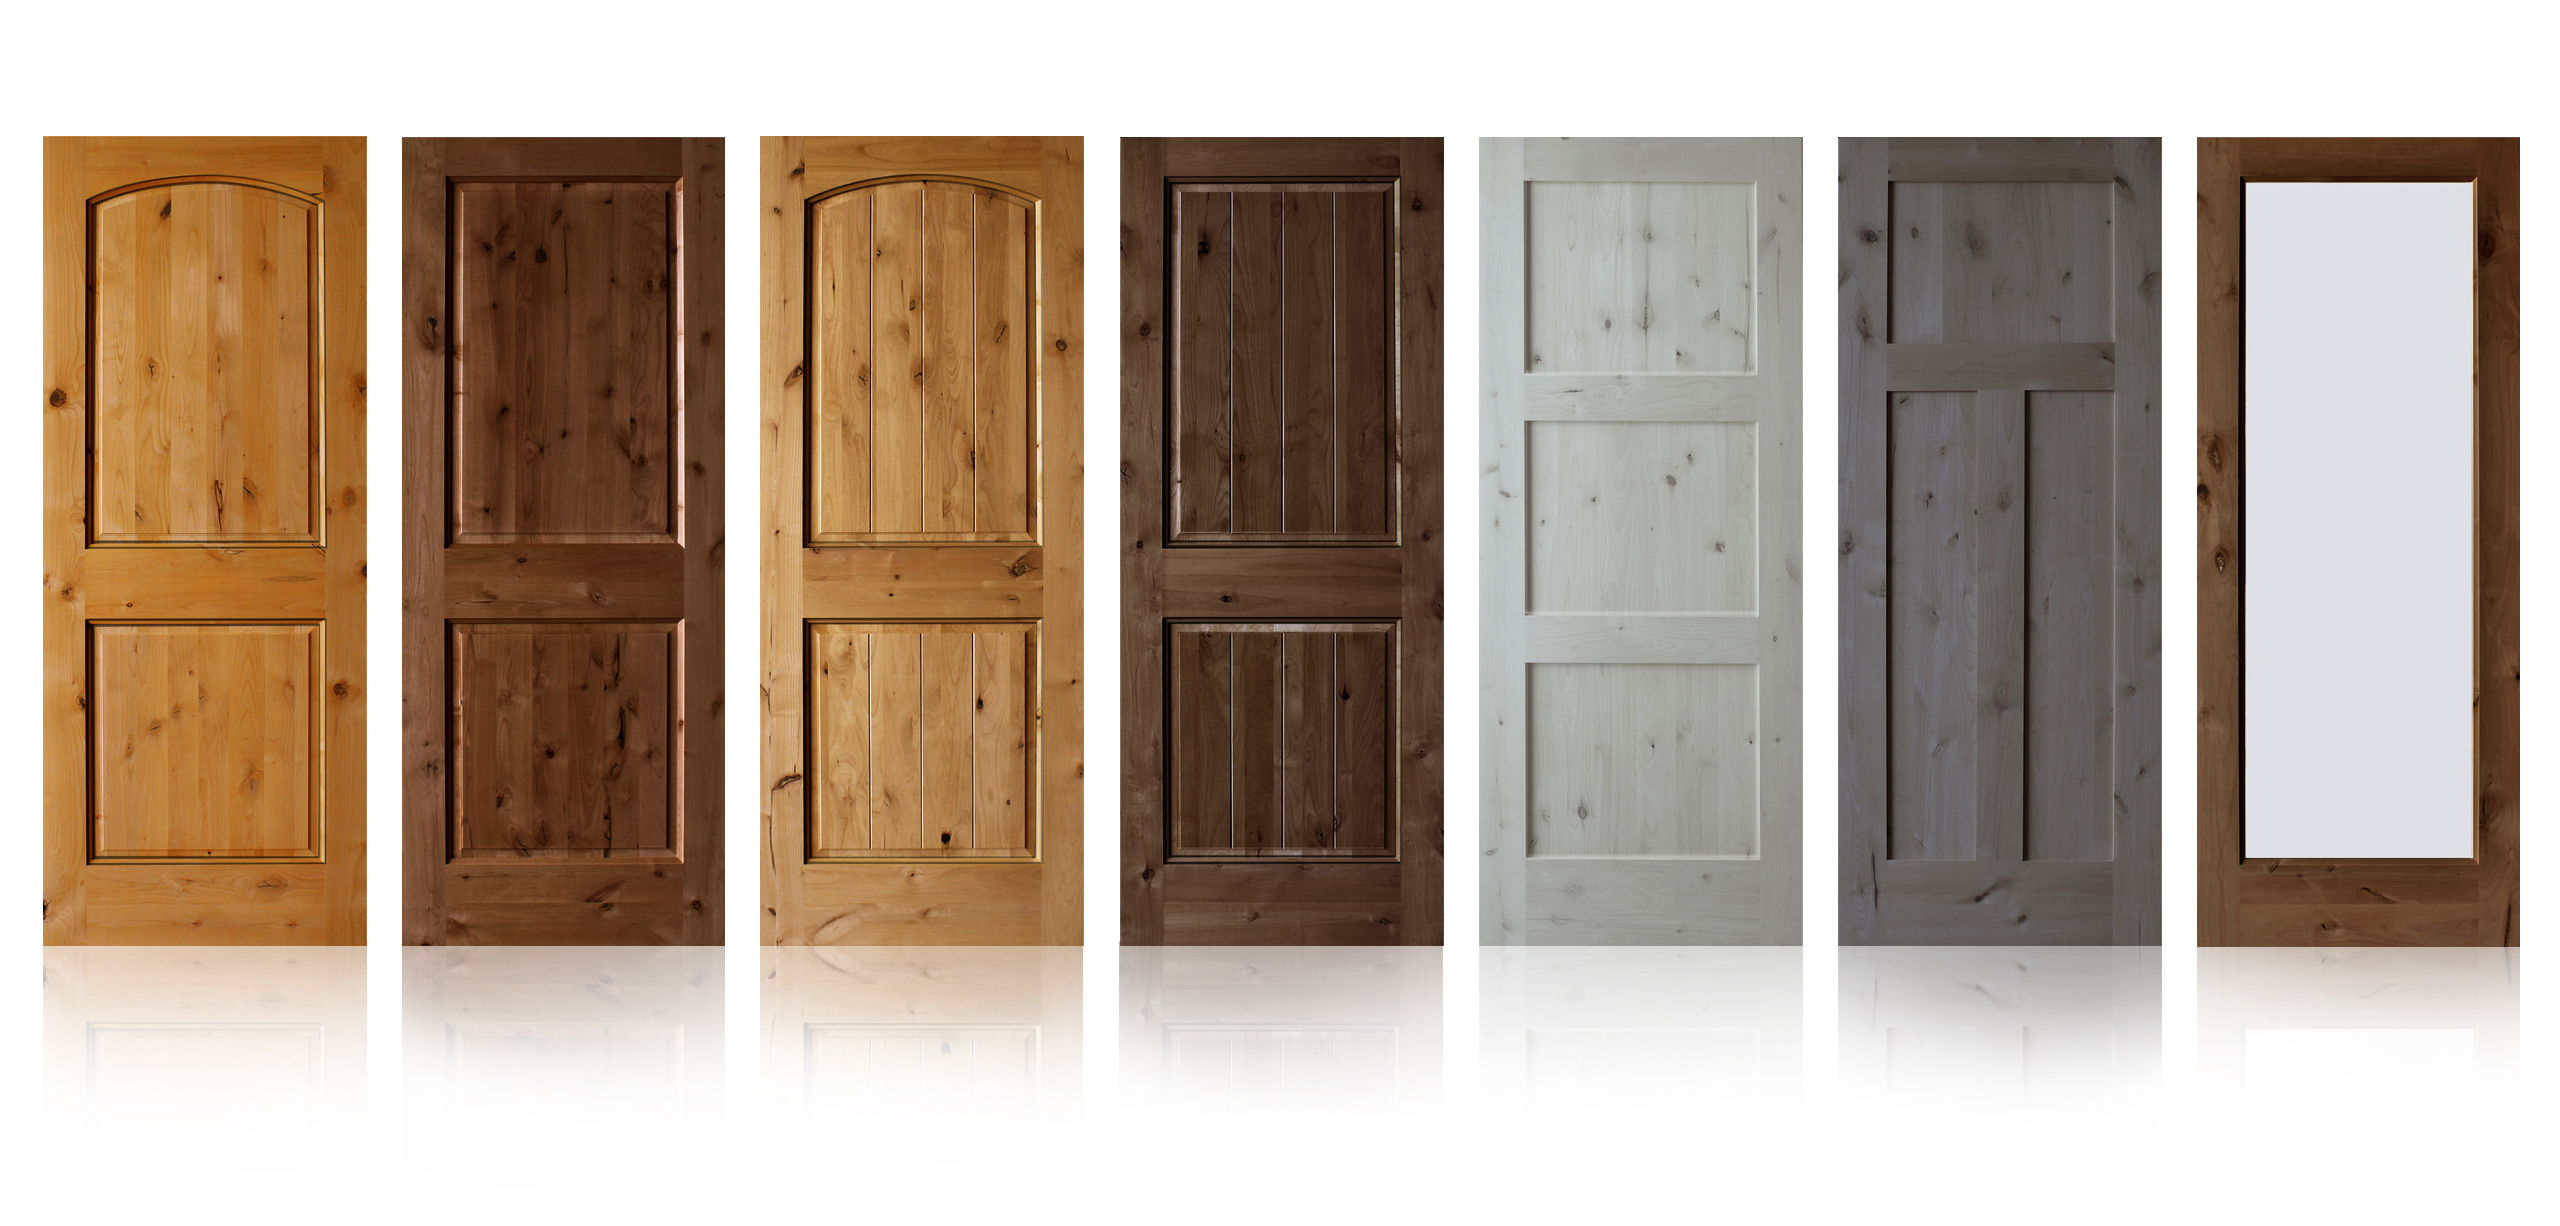 Knotty Alder Door Designs and Finishes